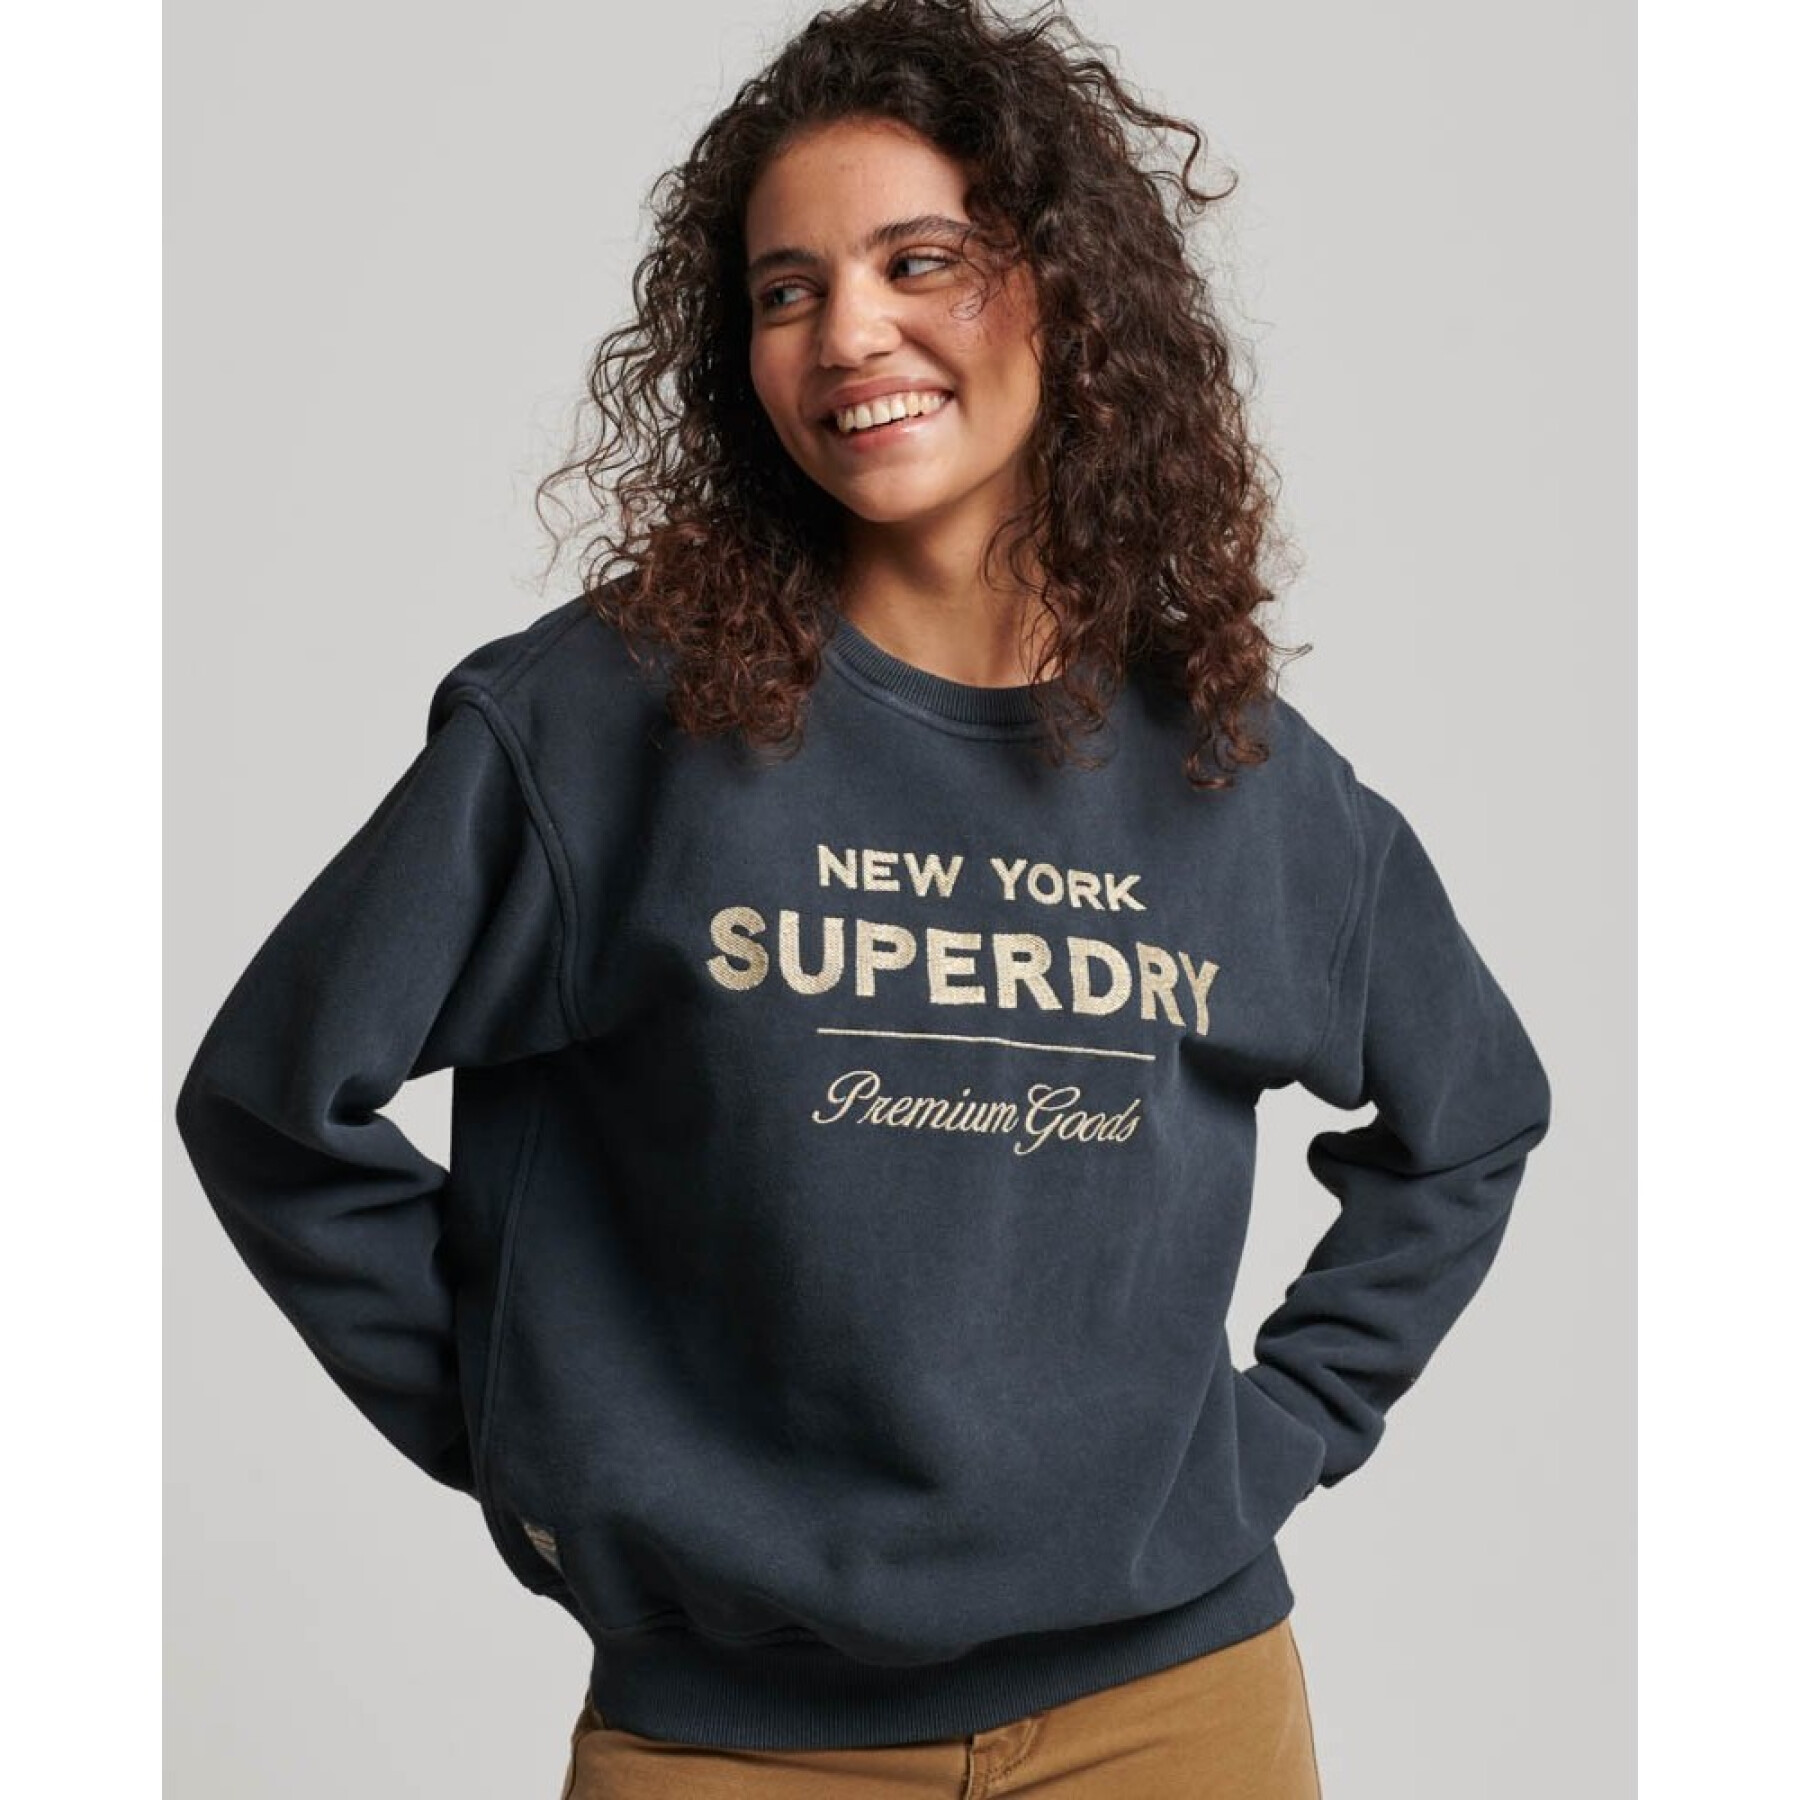 Camisola para mulher Superdry Luxe Metallic